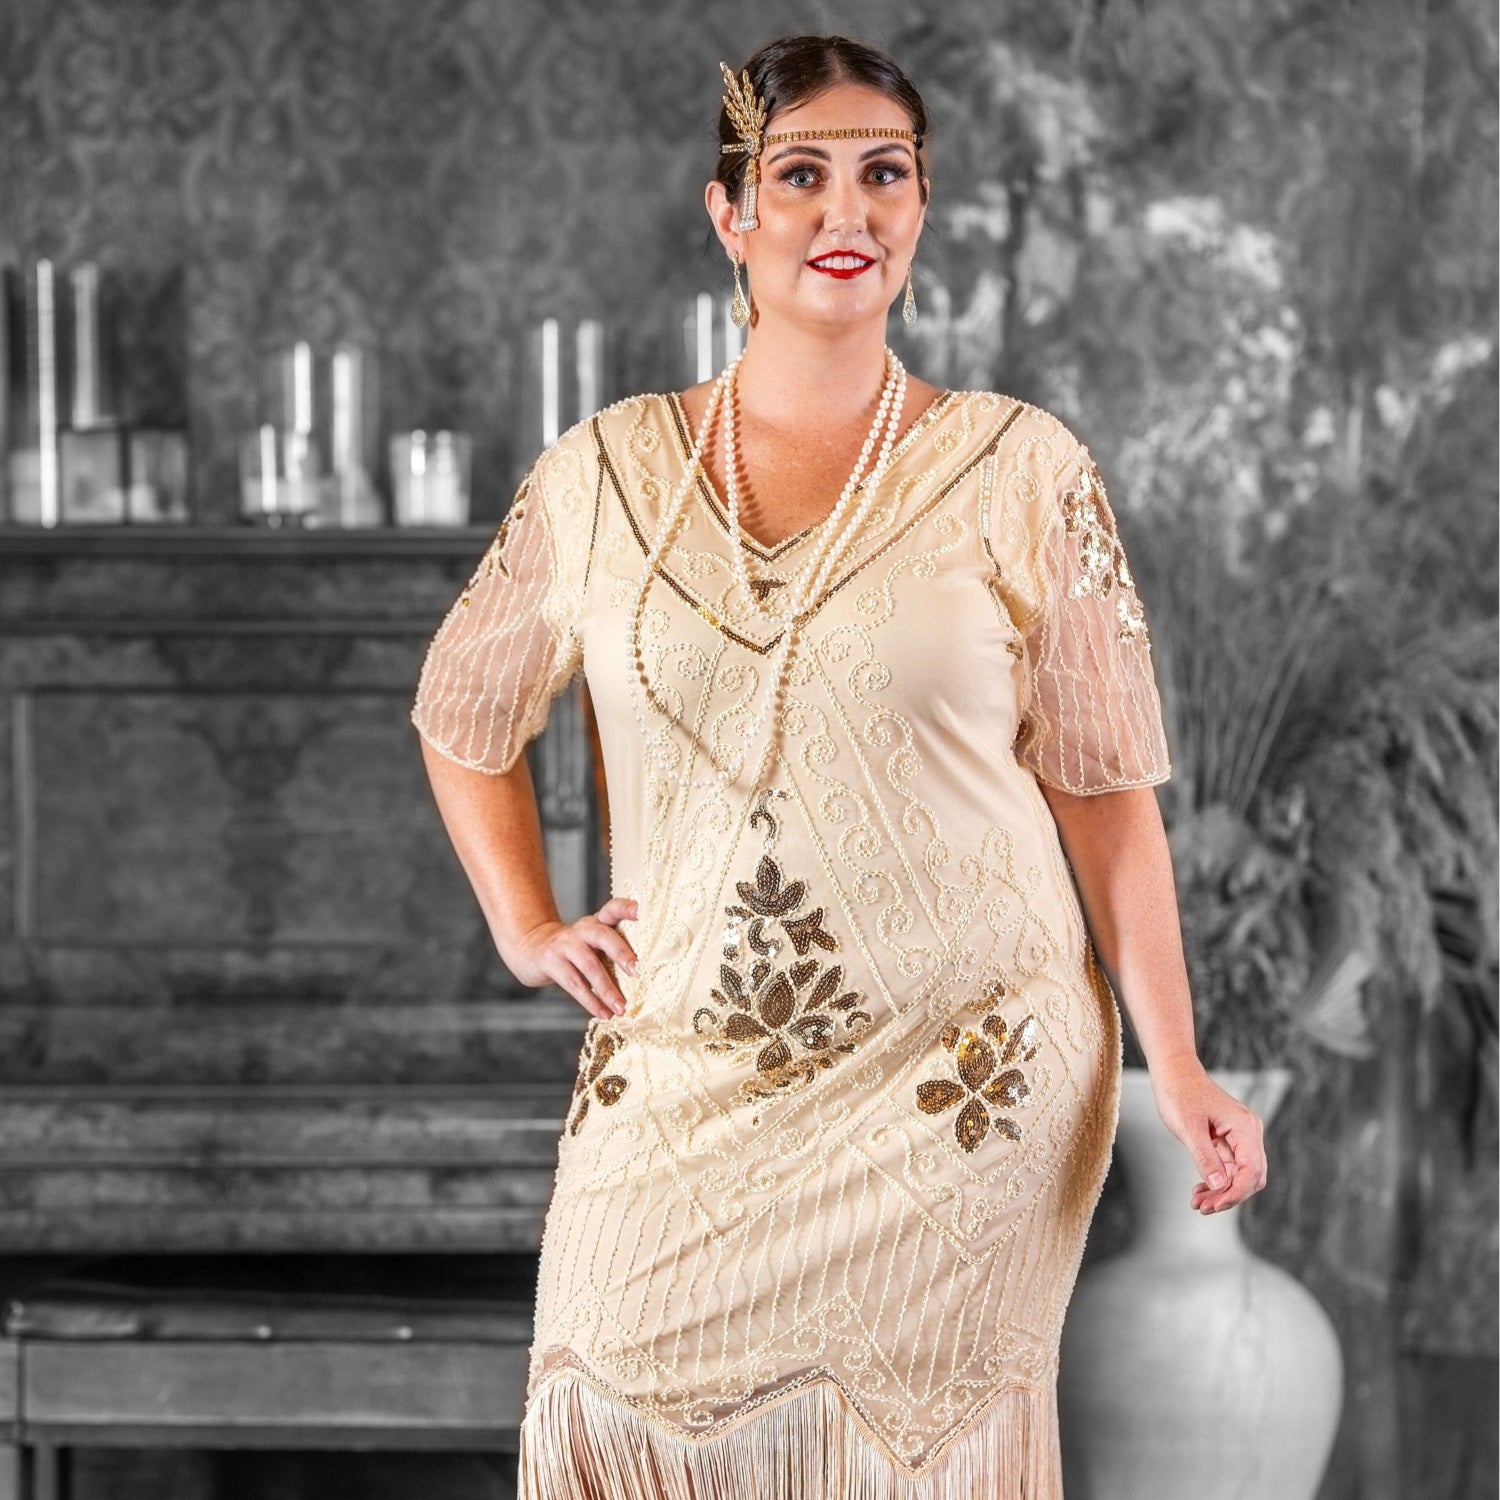 Plus Size Gatsby Dress in Cream Color with Beads and Sequins